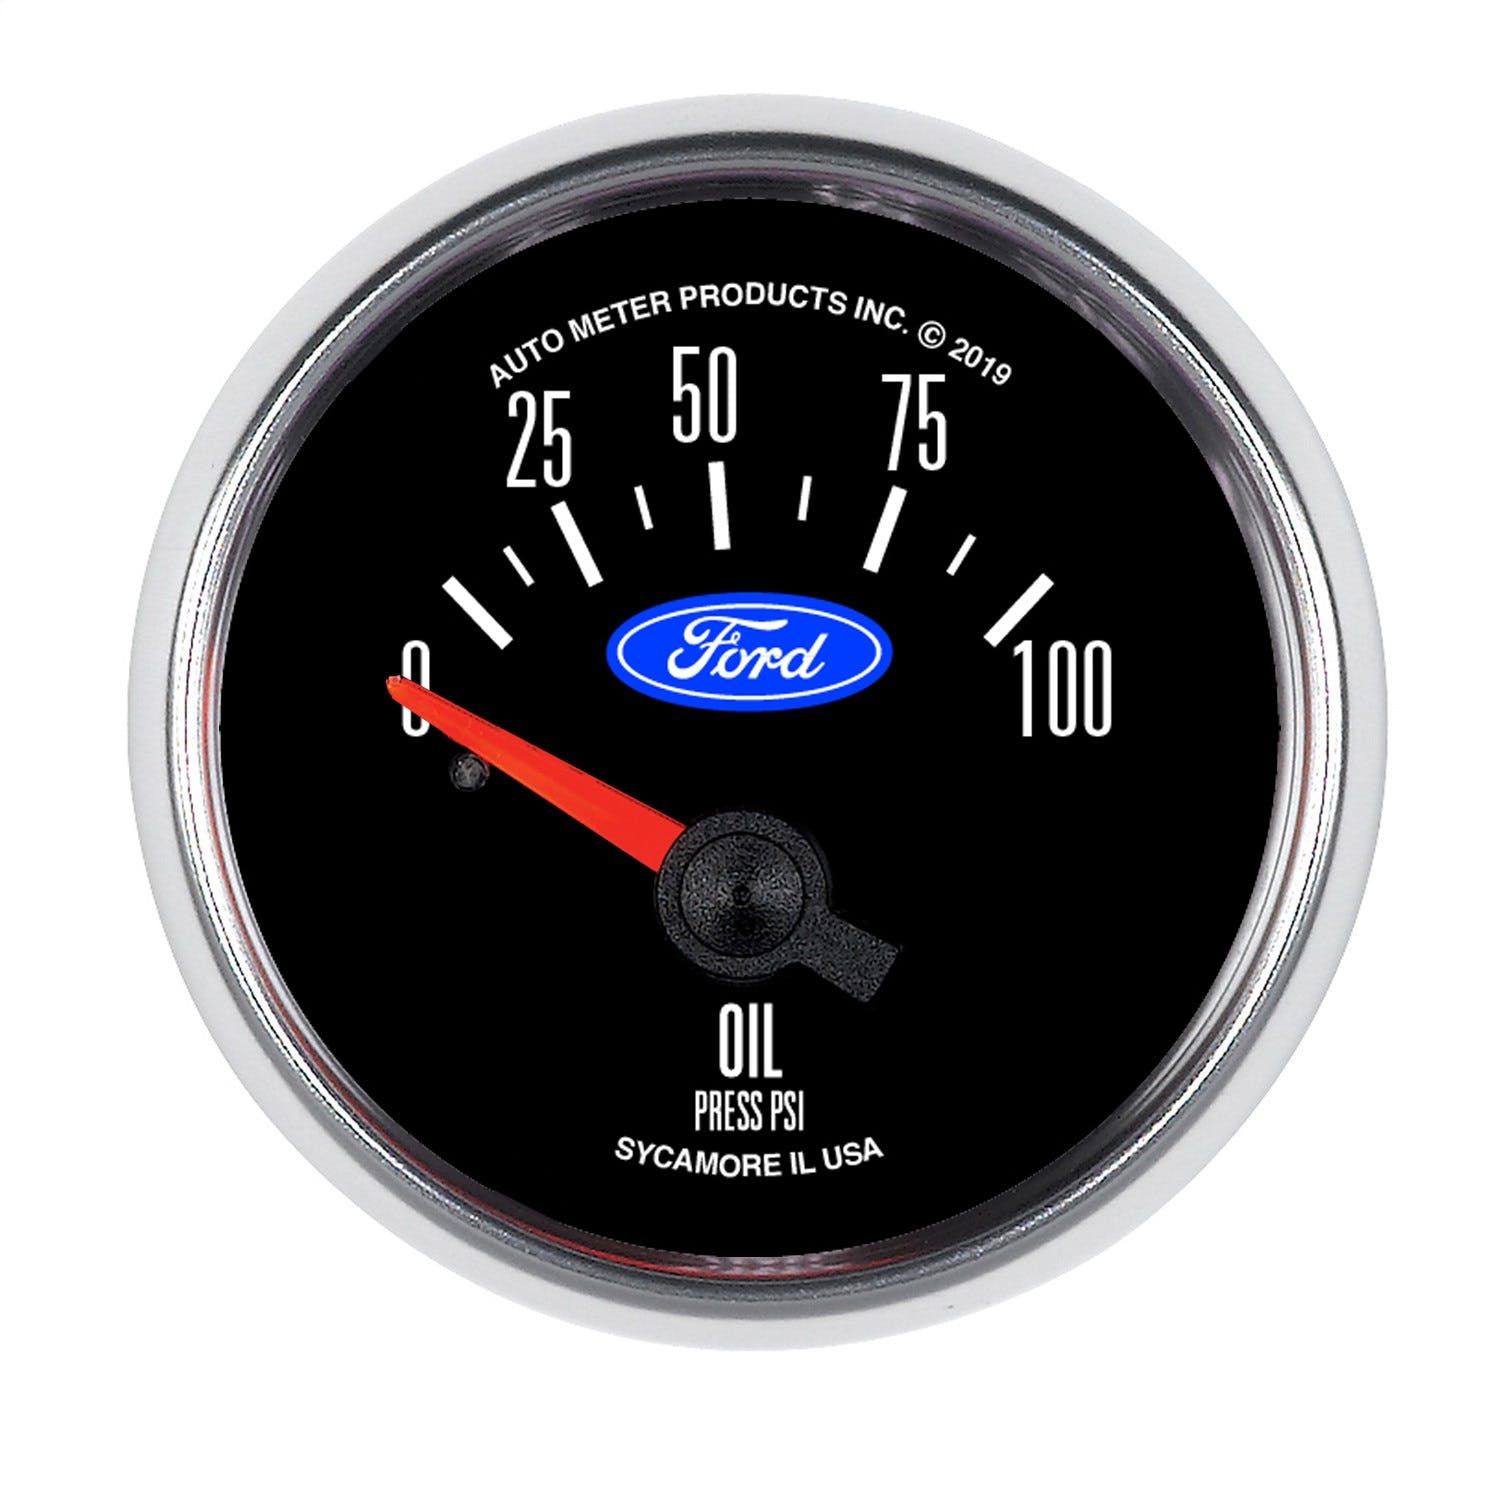 AutoMeter Products 880820 Fuel Level Gauge, 2 1/16, 73 ohm E TO 10 ohm F, Electric, Ford